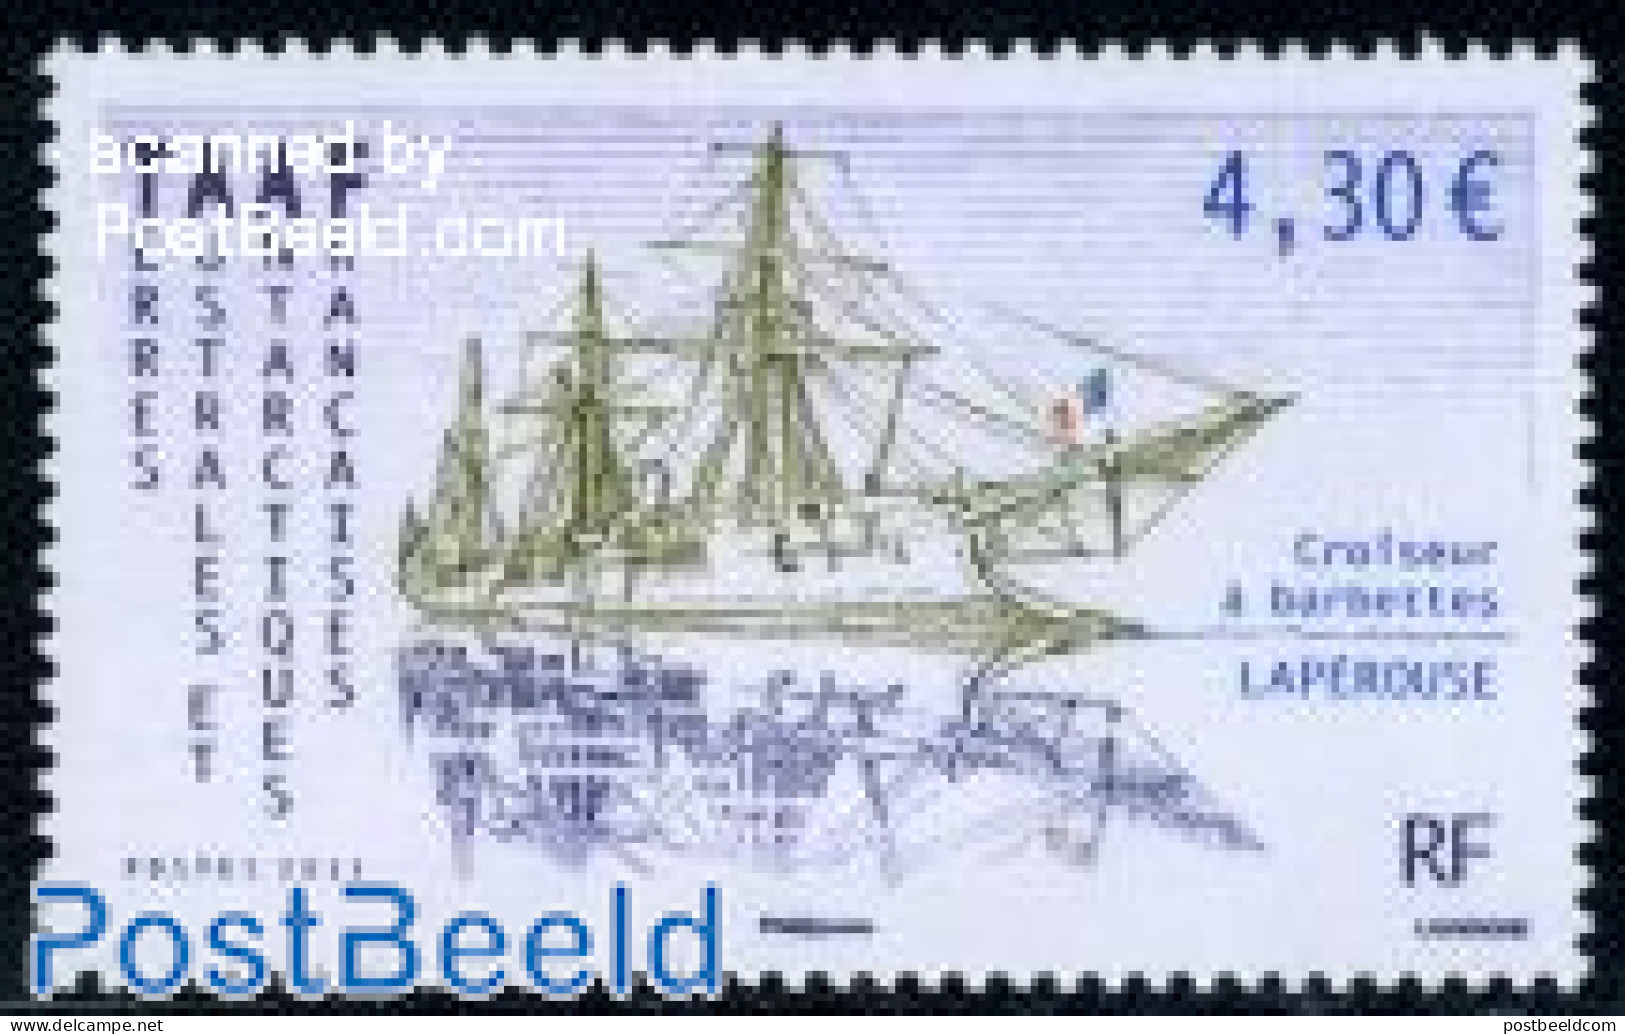 French Antarctic Territory 2011 Laperouse 1v, Mint NH, Transport - Ships And Boats - Nuovi